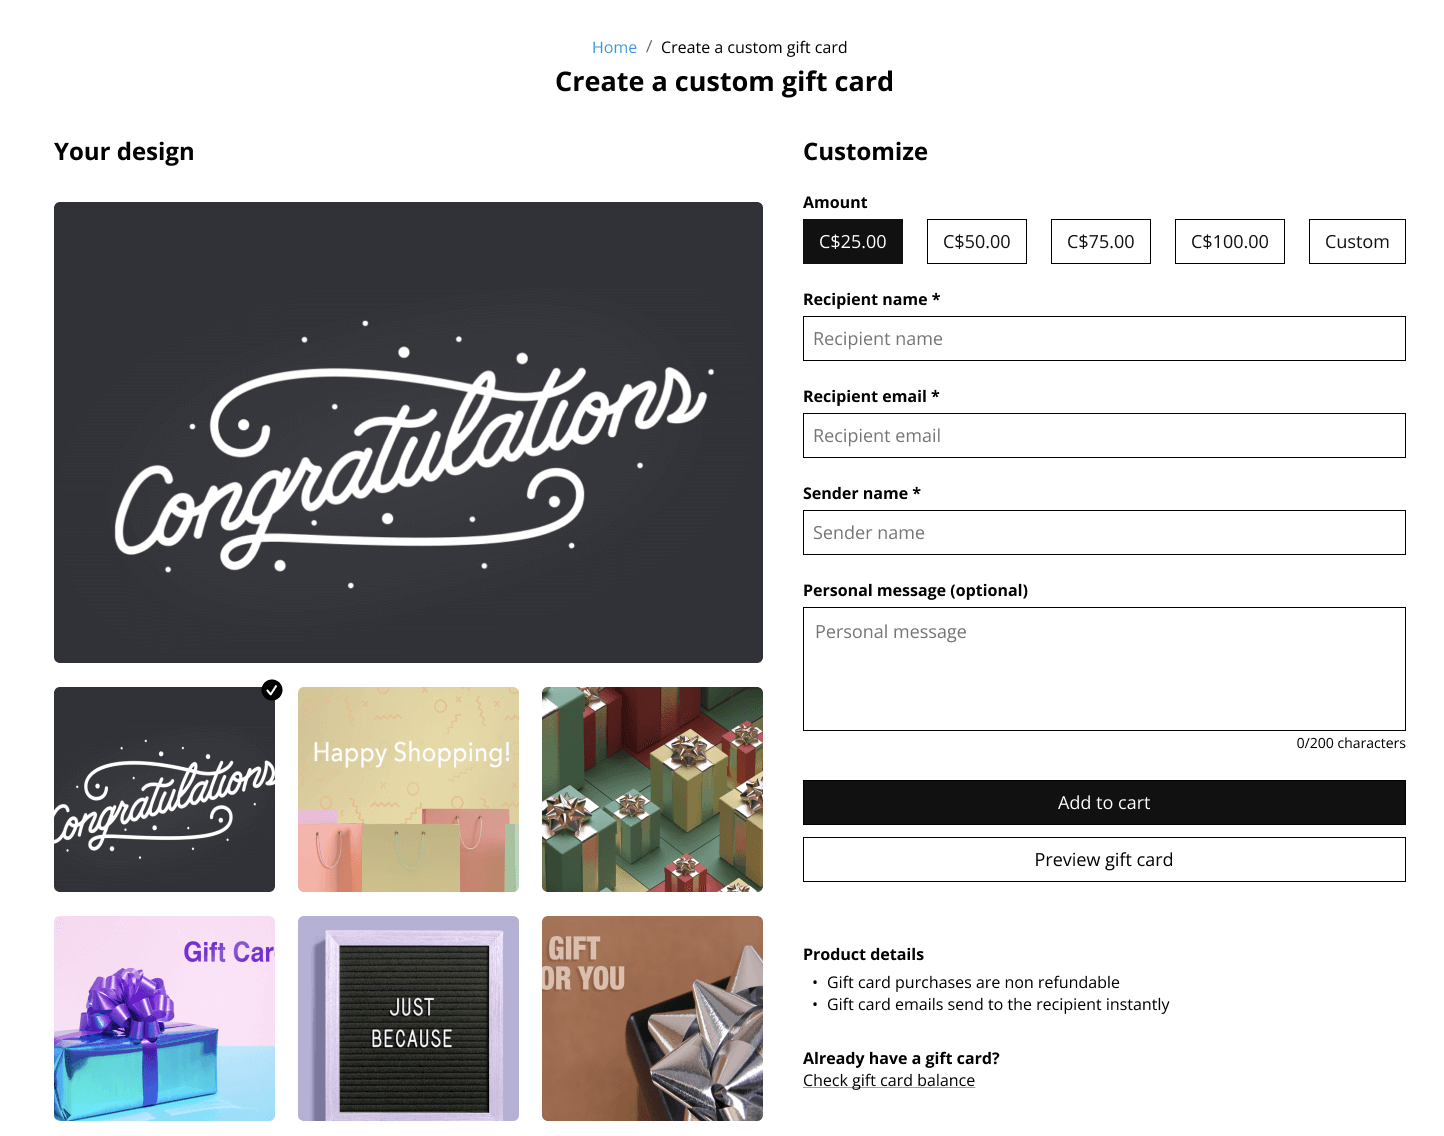 eCom gift card sell screen with fields to fill out personalized information.